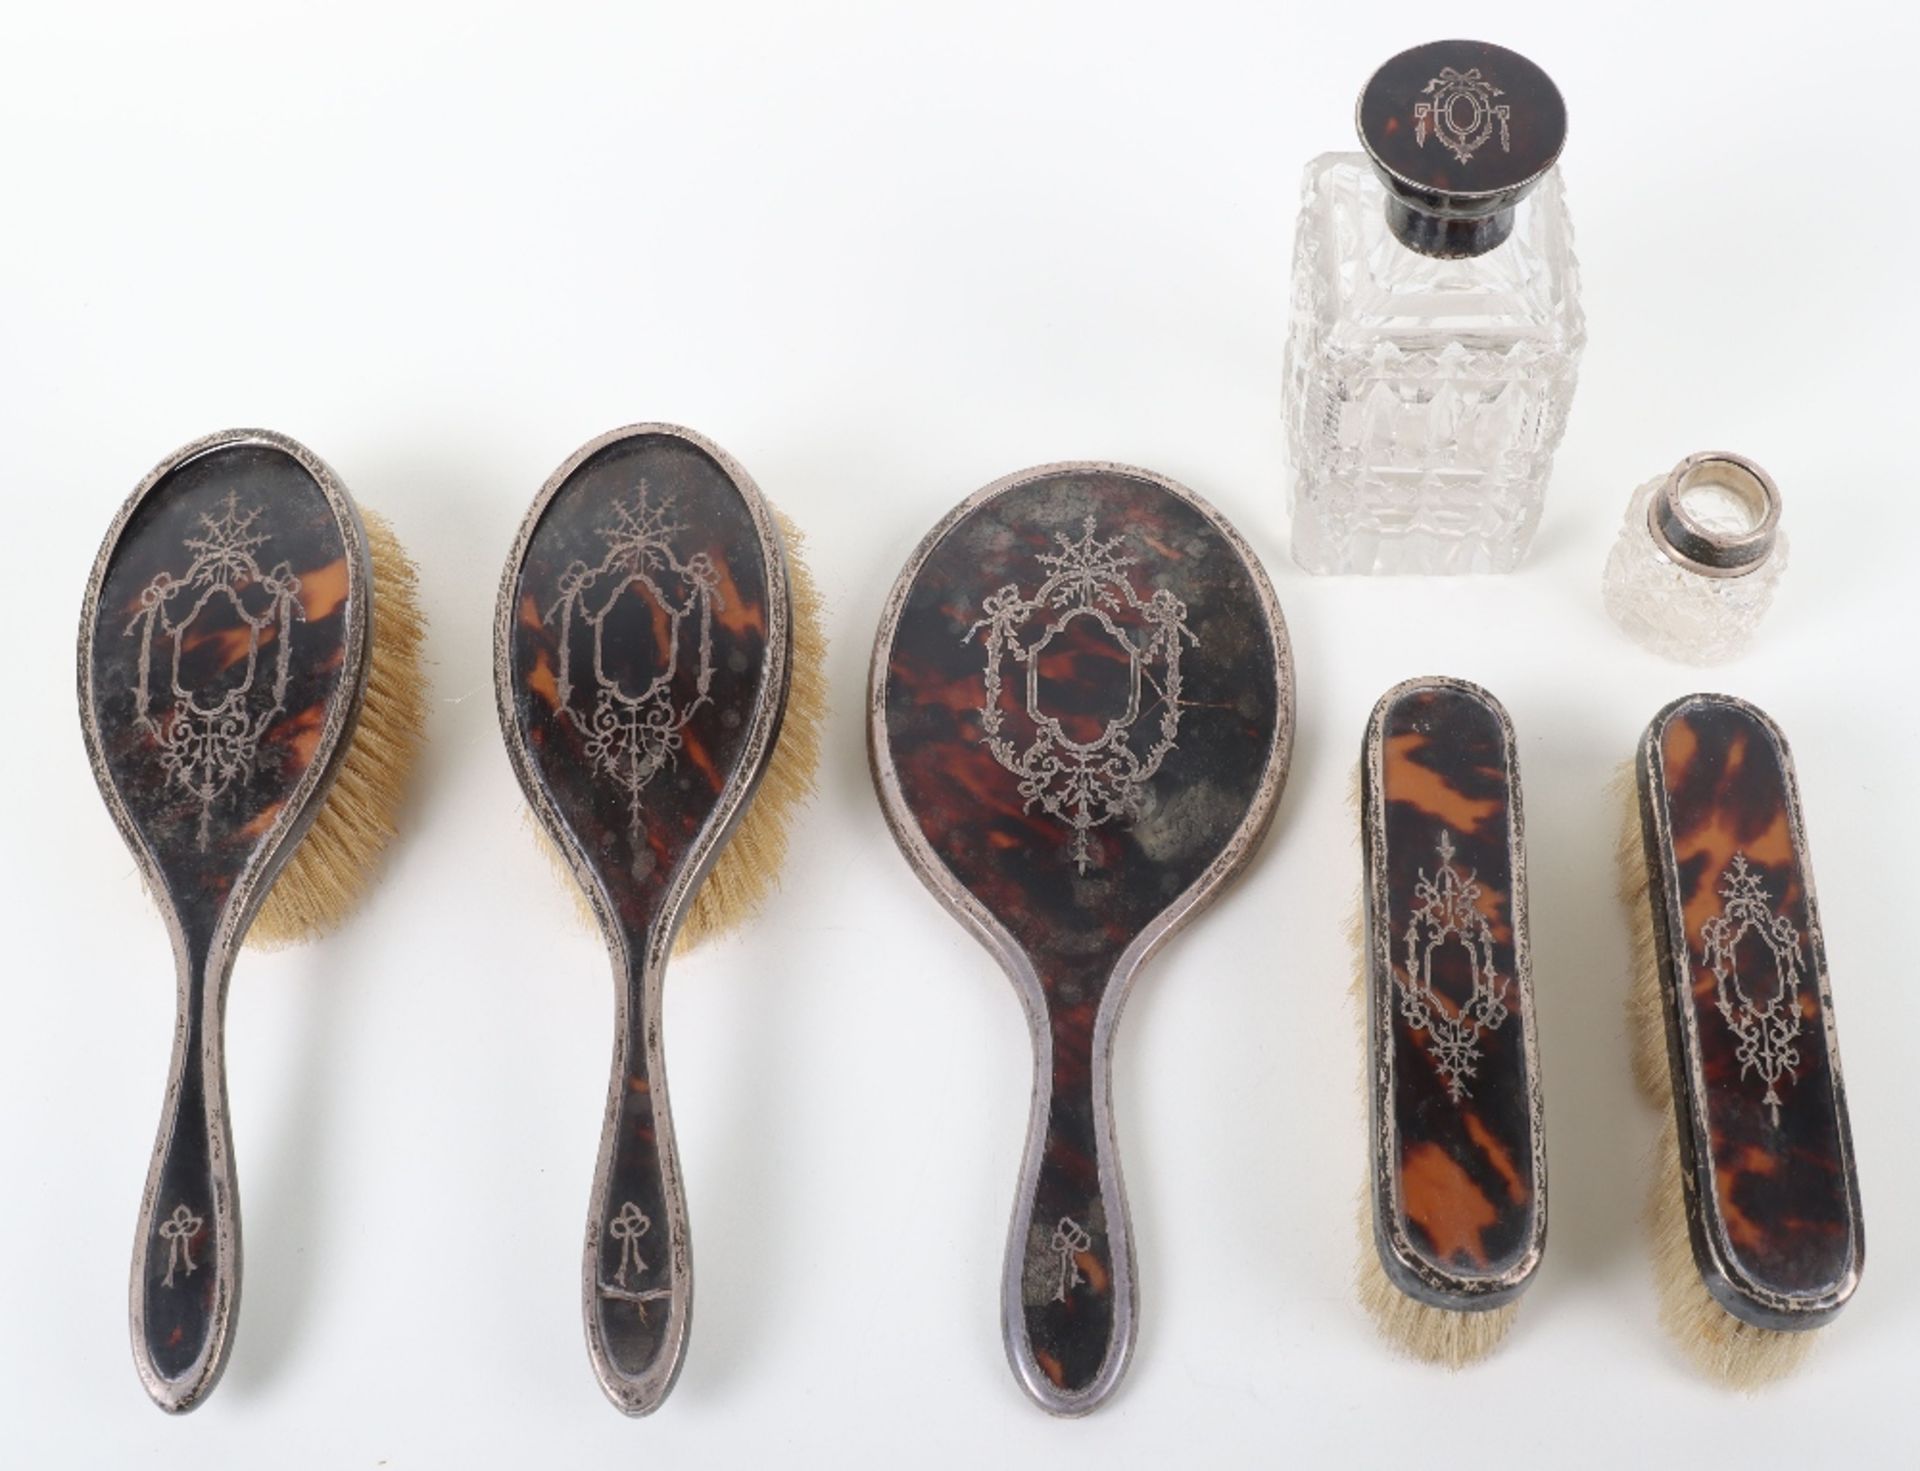 An early 20th century silver, tortoiseshell and pique work dressing table set, Charles Henry Dumenii